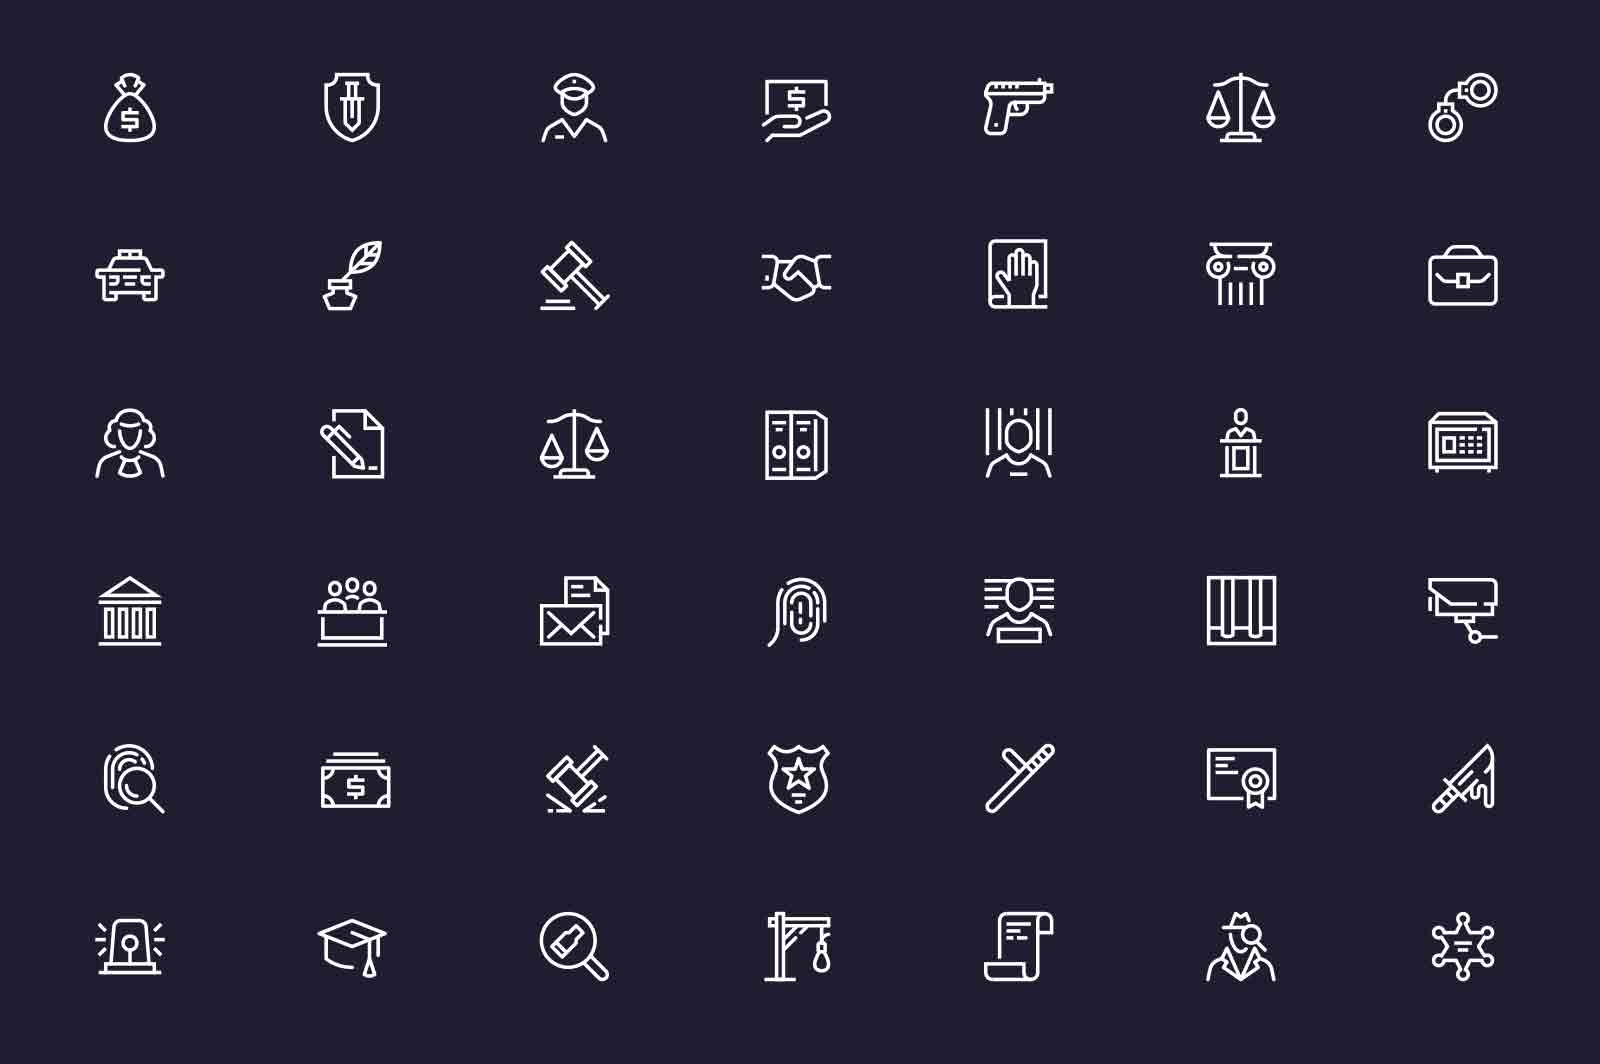 Law and justice related symbols icons set vector illustration. Hammer, legal scales, lawyer, courthouse line icon. Dark background